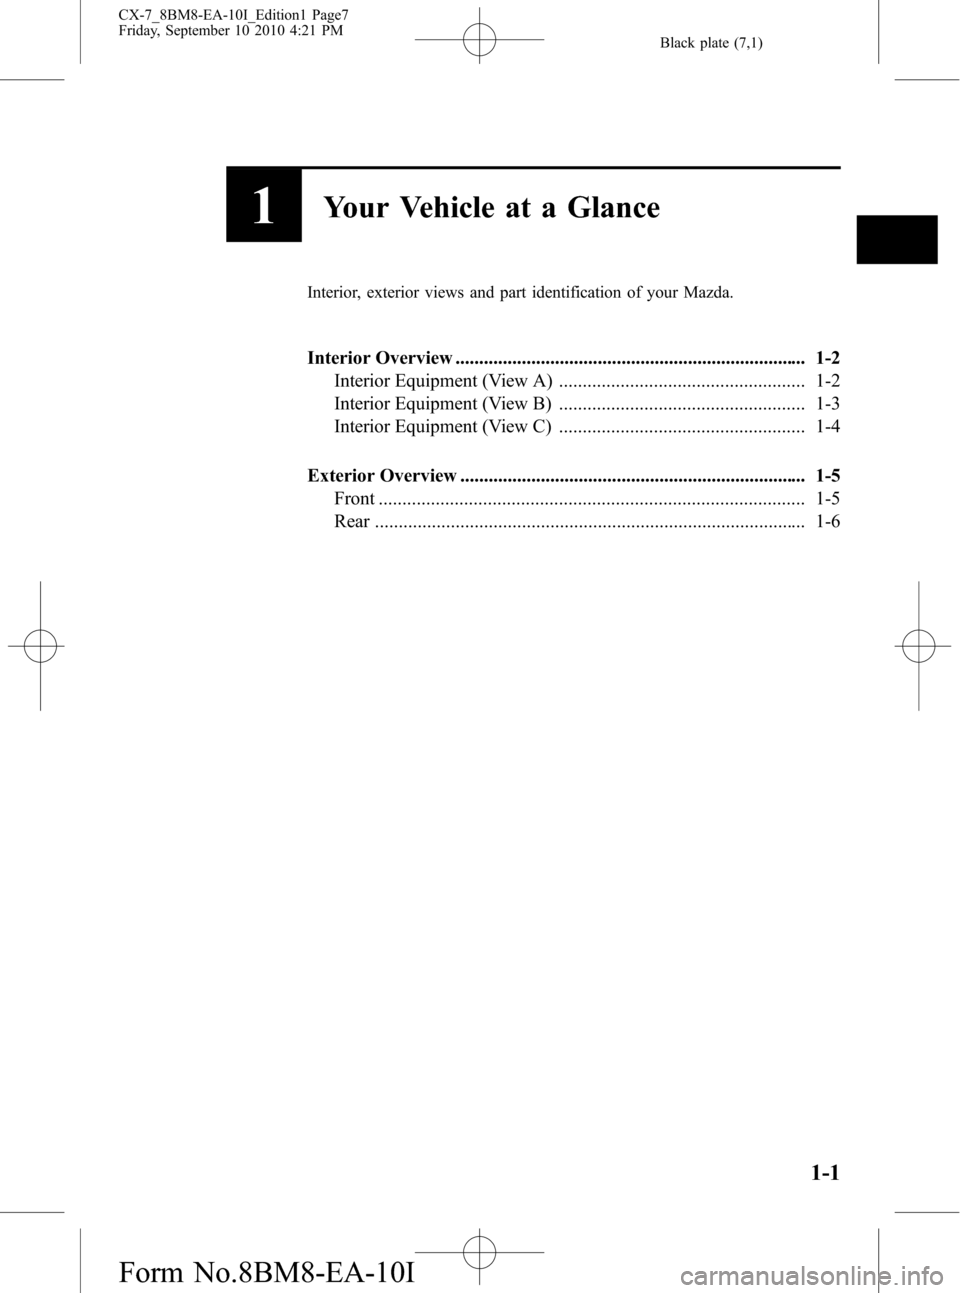 MAZDA MODEL CX-7 2011  Owners Manual (in English) Black plate (7,1)
1Your Vehicle at a Glance
Interior, exterior views and part identification of your Mazda.
Interior Overview ..........................................................................